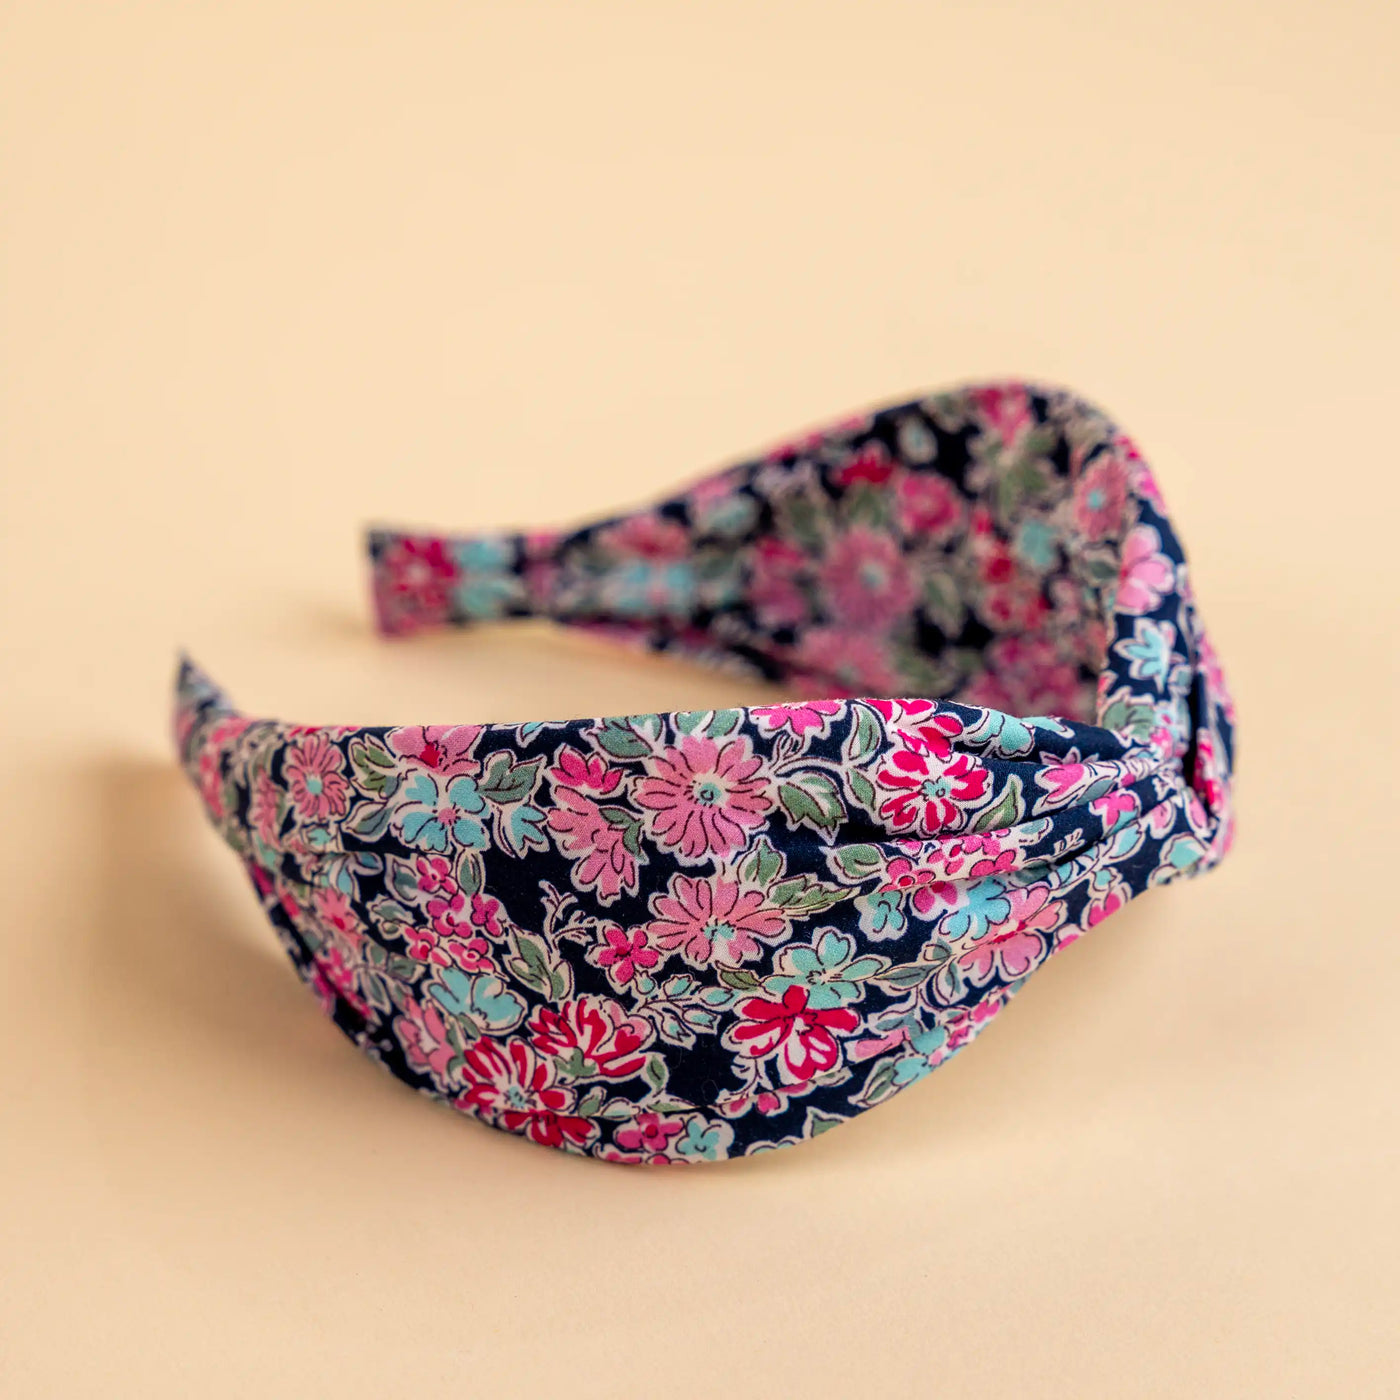 Lucys Navy Poppy Floral Headband. Dark navy background with pink and blue flowers. Side view.